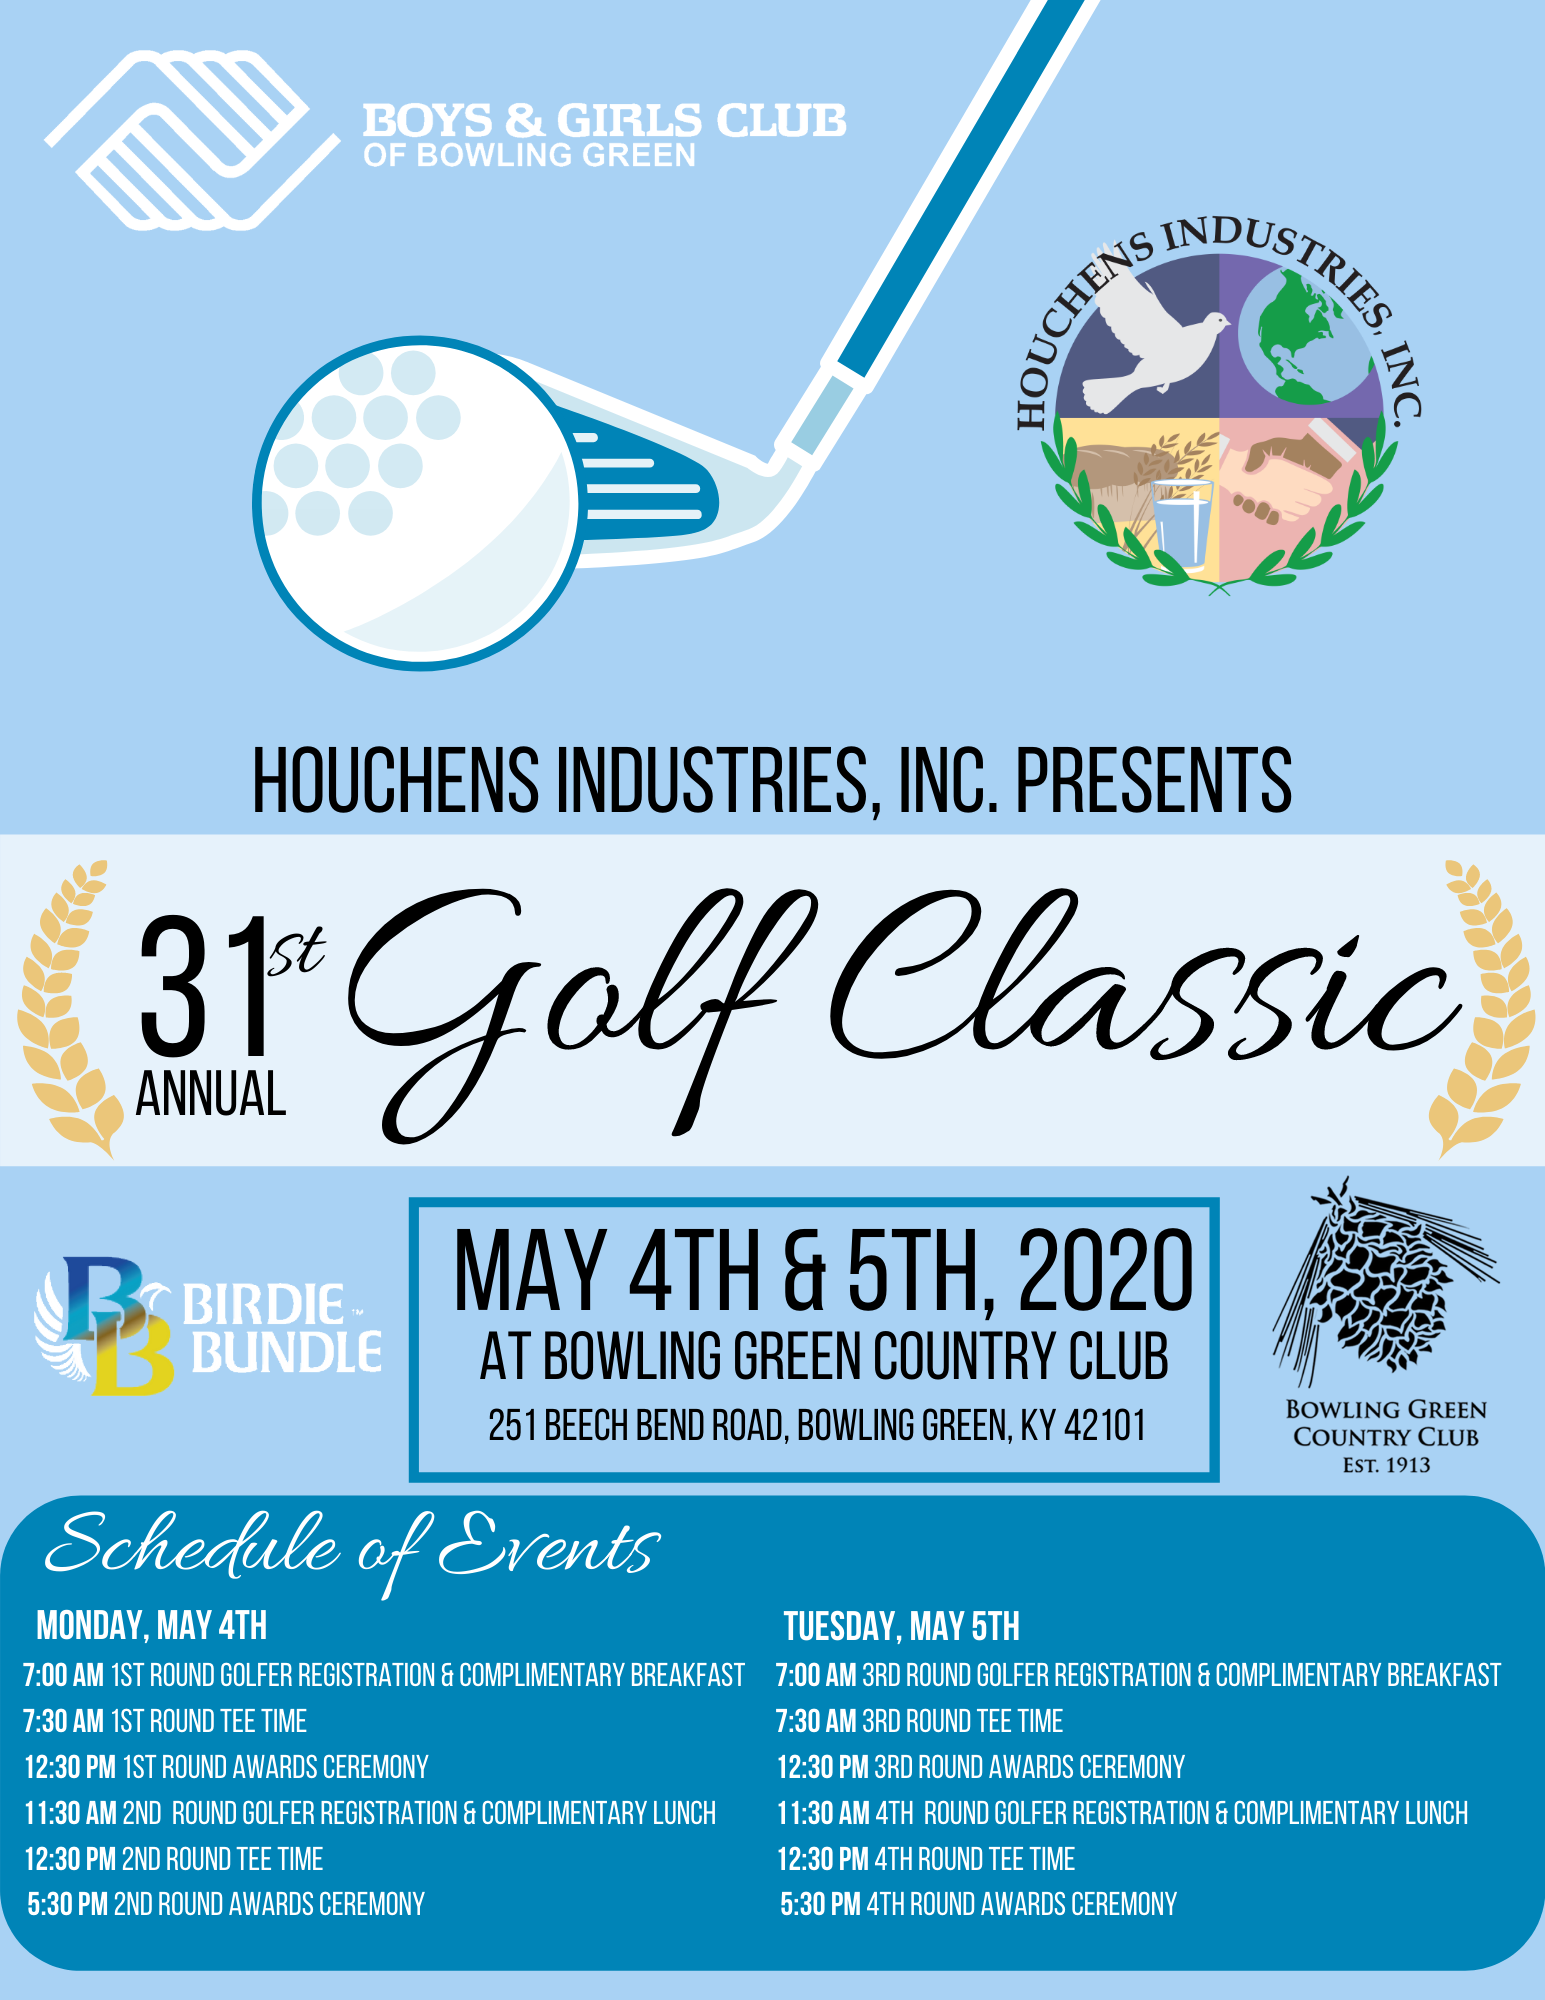 Boys and Girls Club Golf Classic Announcement